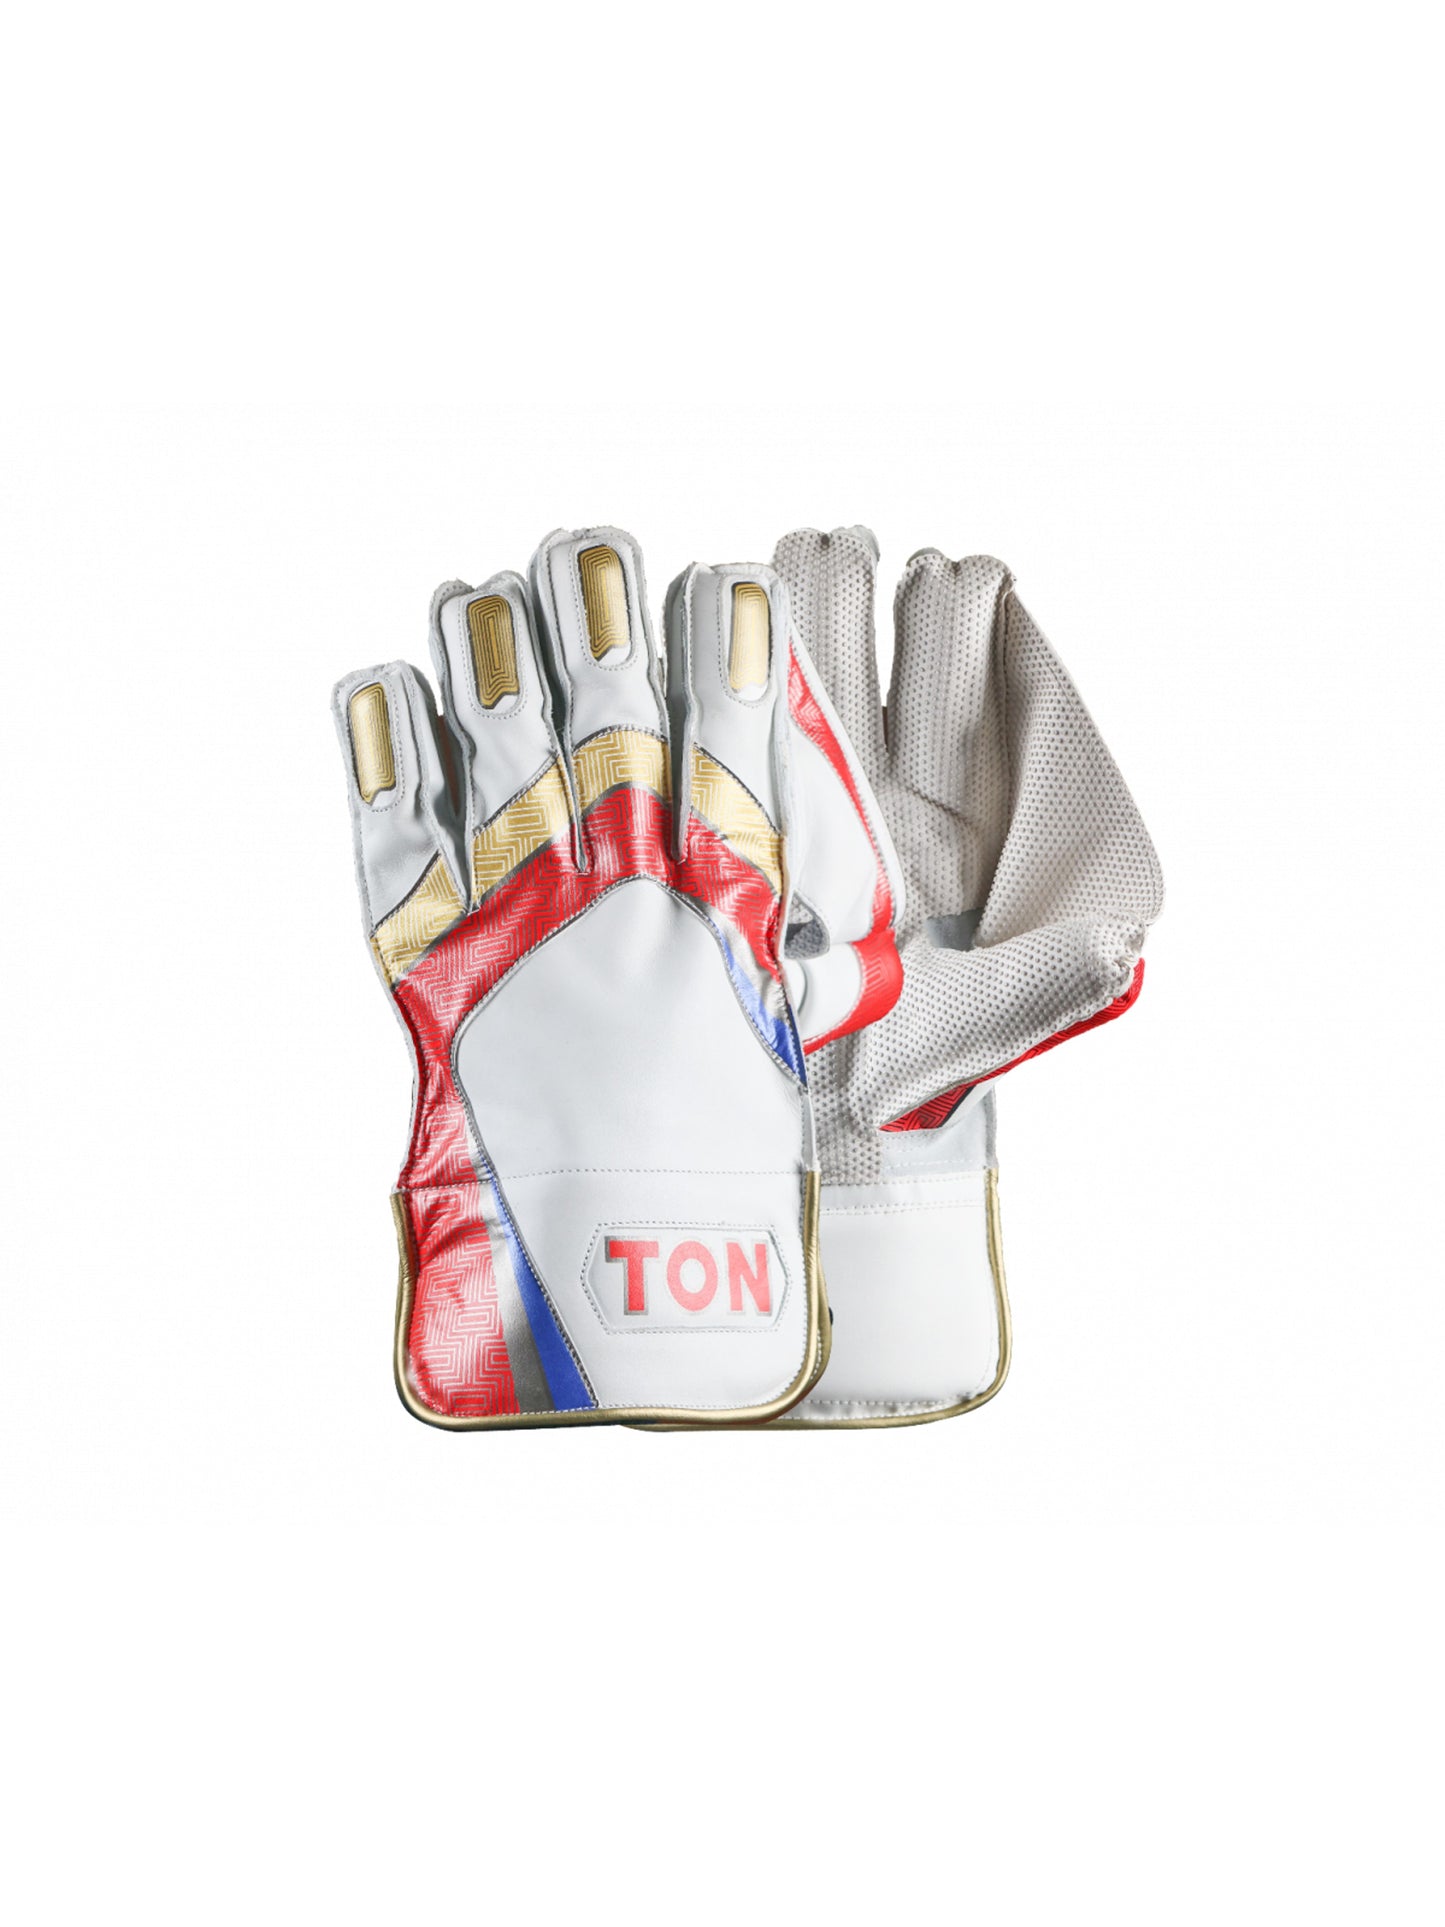 SS TON Pro 1.0 Wicket Keeping Gloves